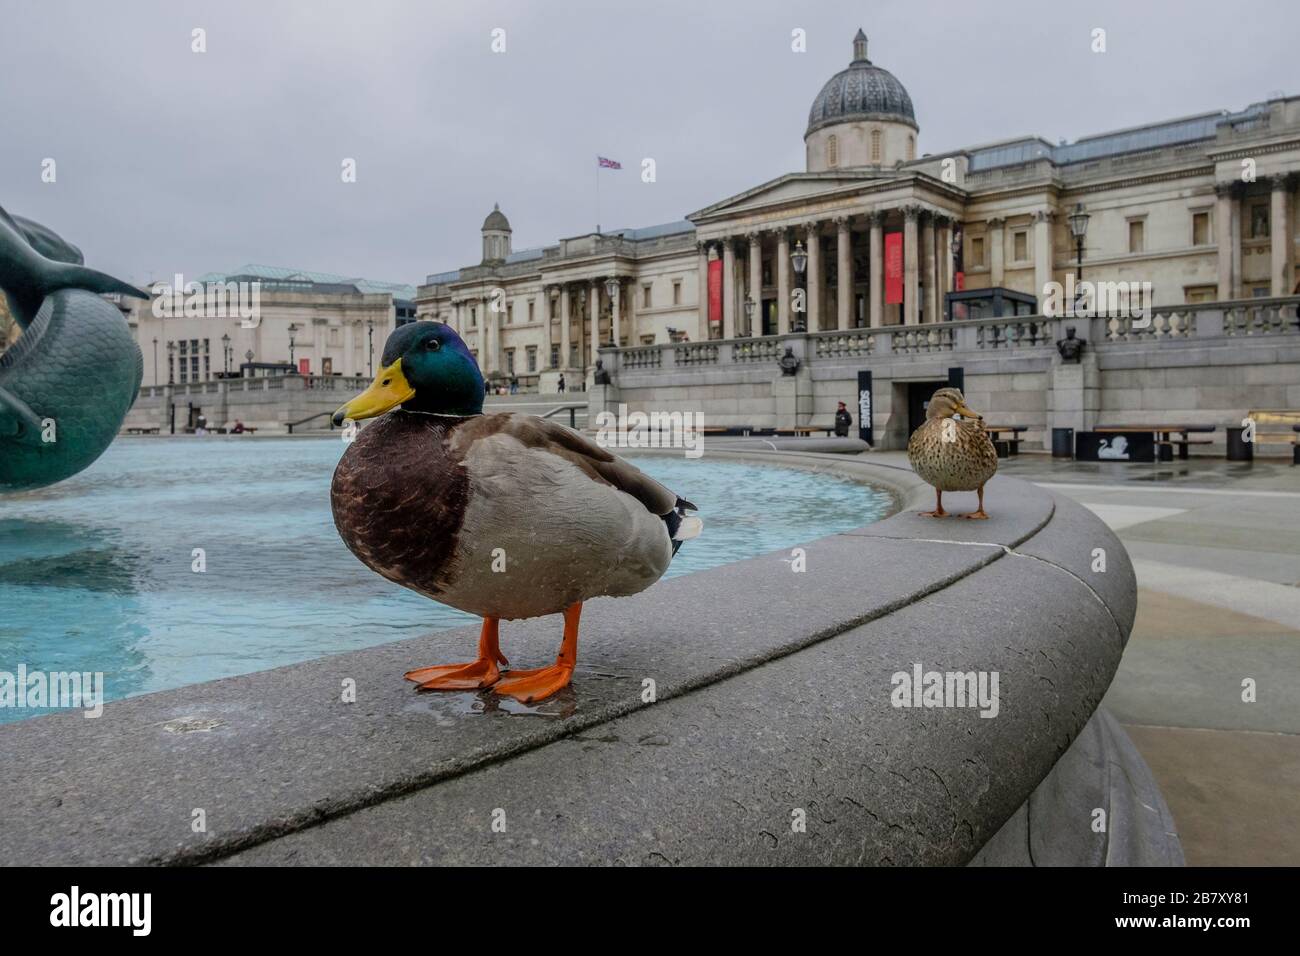 London, UK 18 March 2020. A pair of ducks take advantage of a deserted Trafalgar Square to use the fountains which have been  turned off during the Covid-19 pandemic. Stock Photo